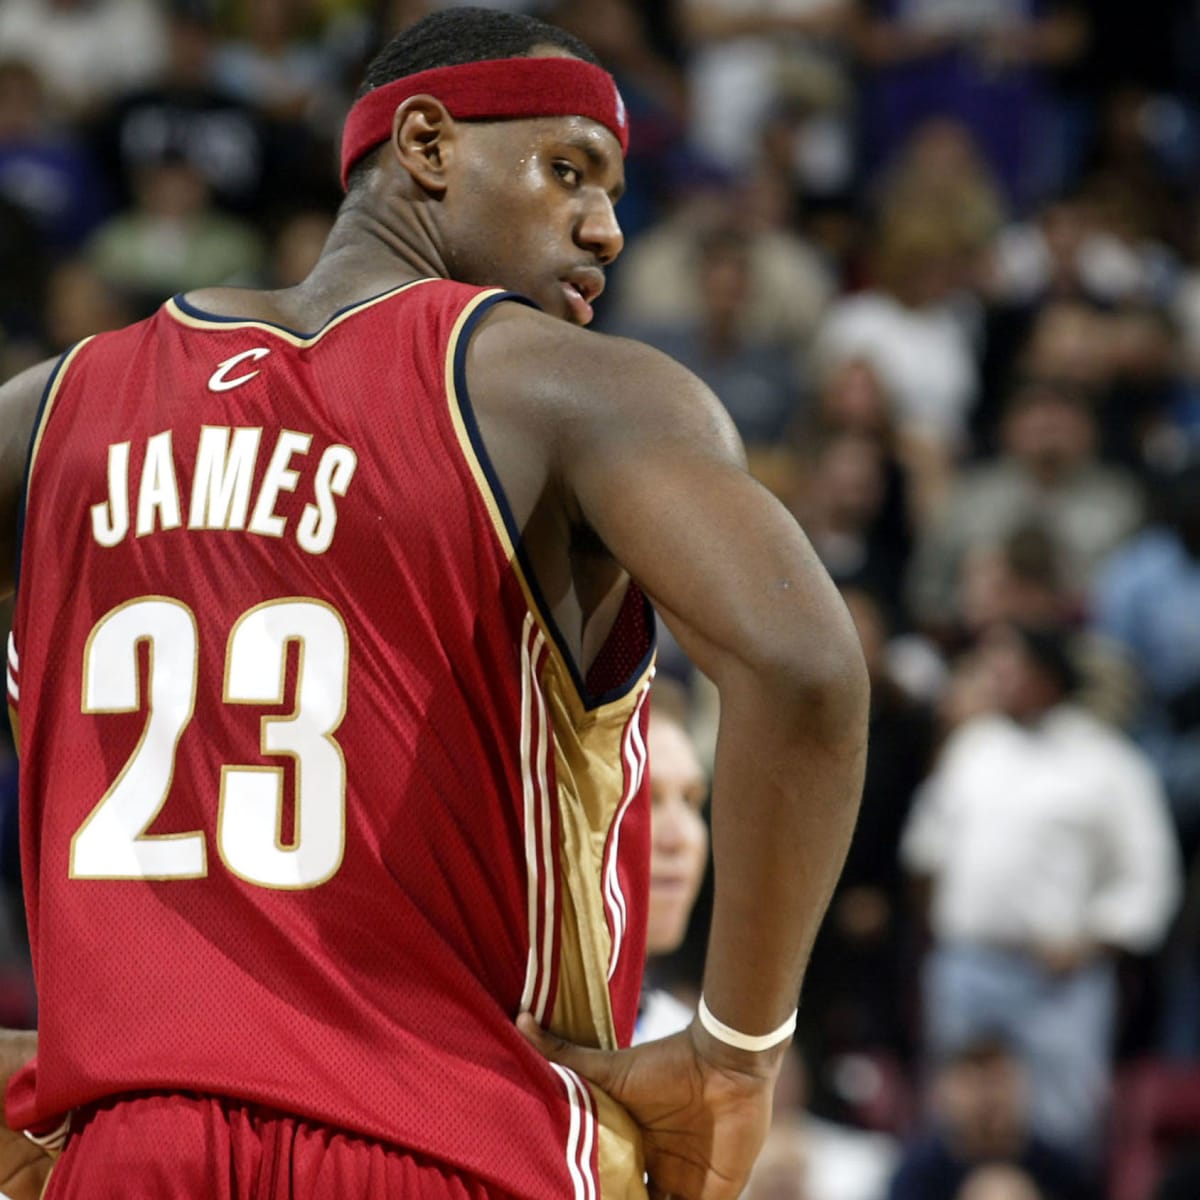 Despite Sharing “23” Jersey Number With LeBron James, Michael